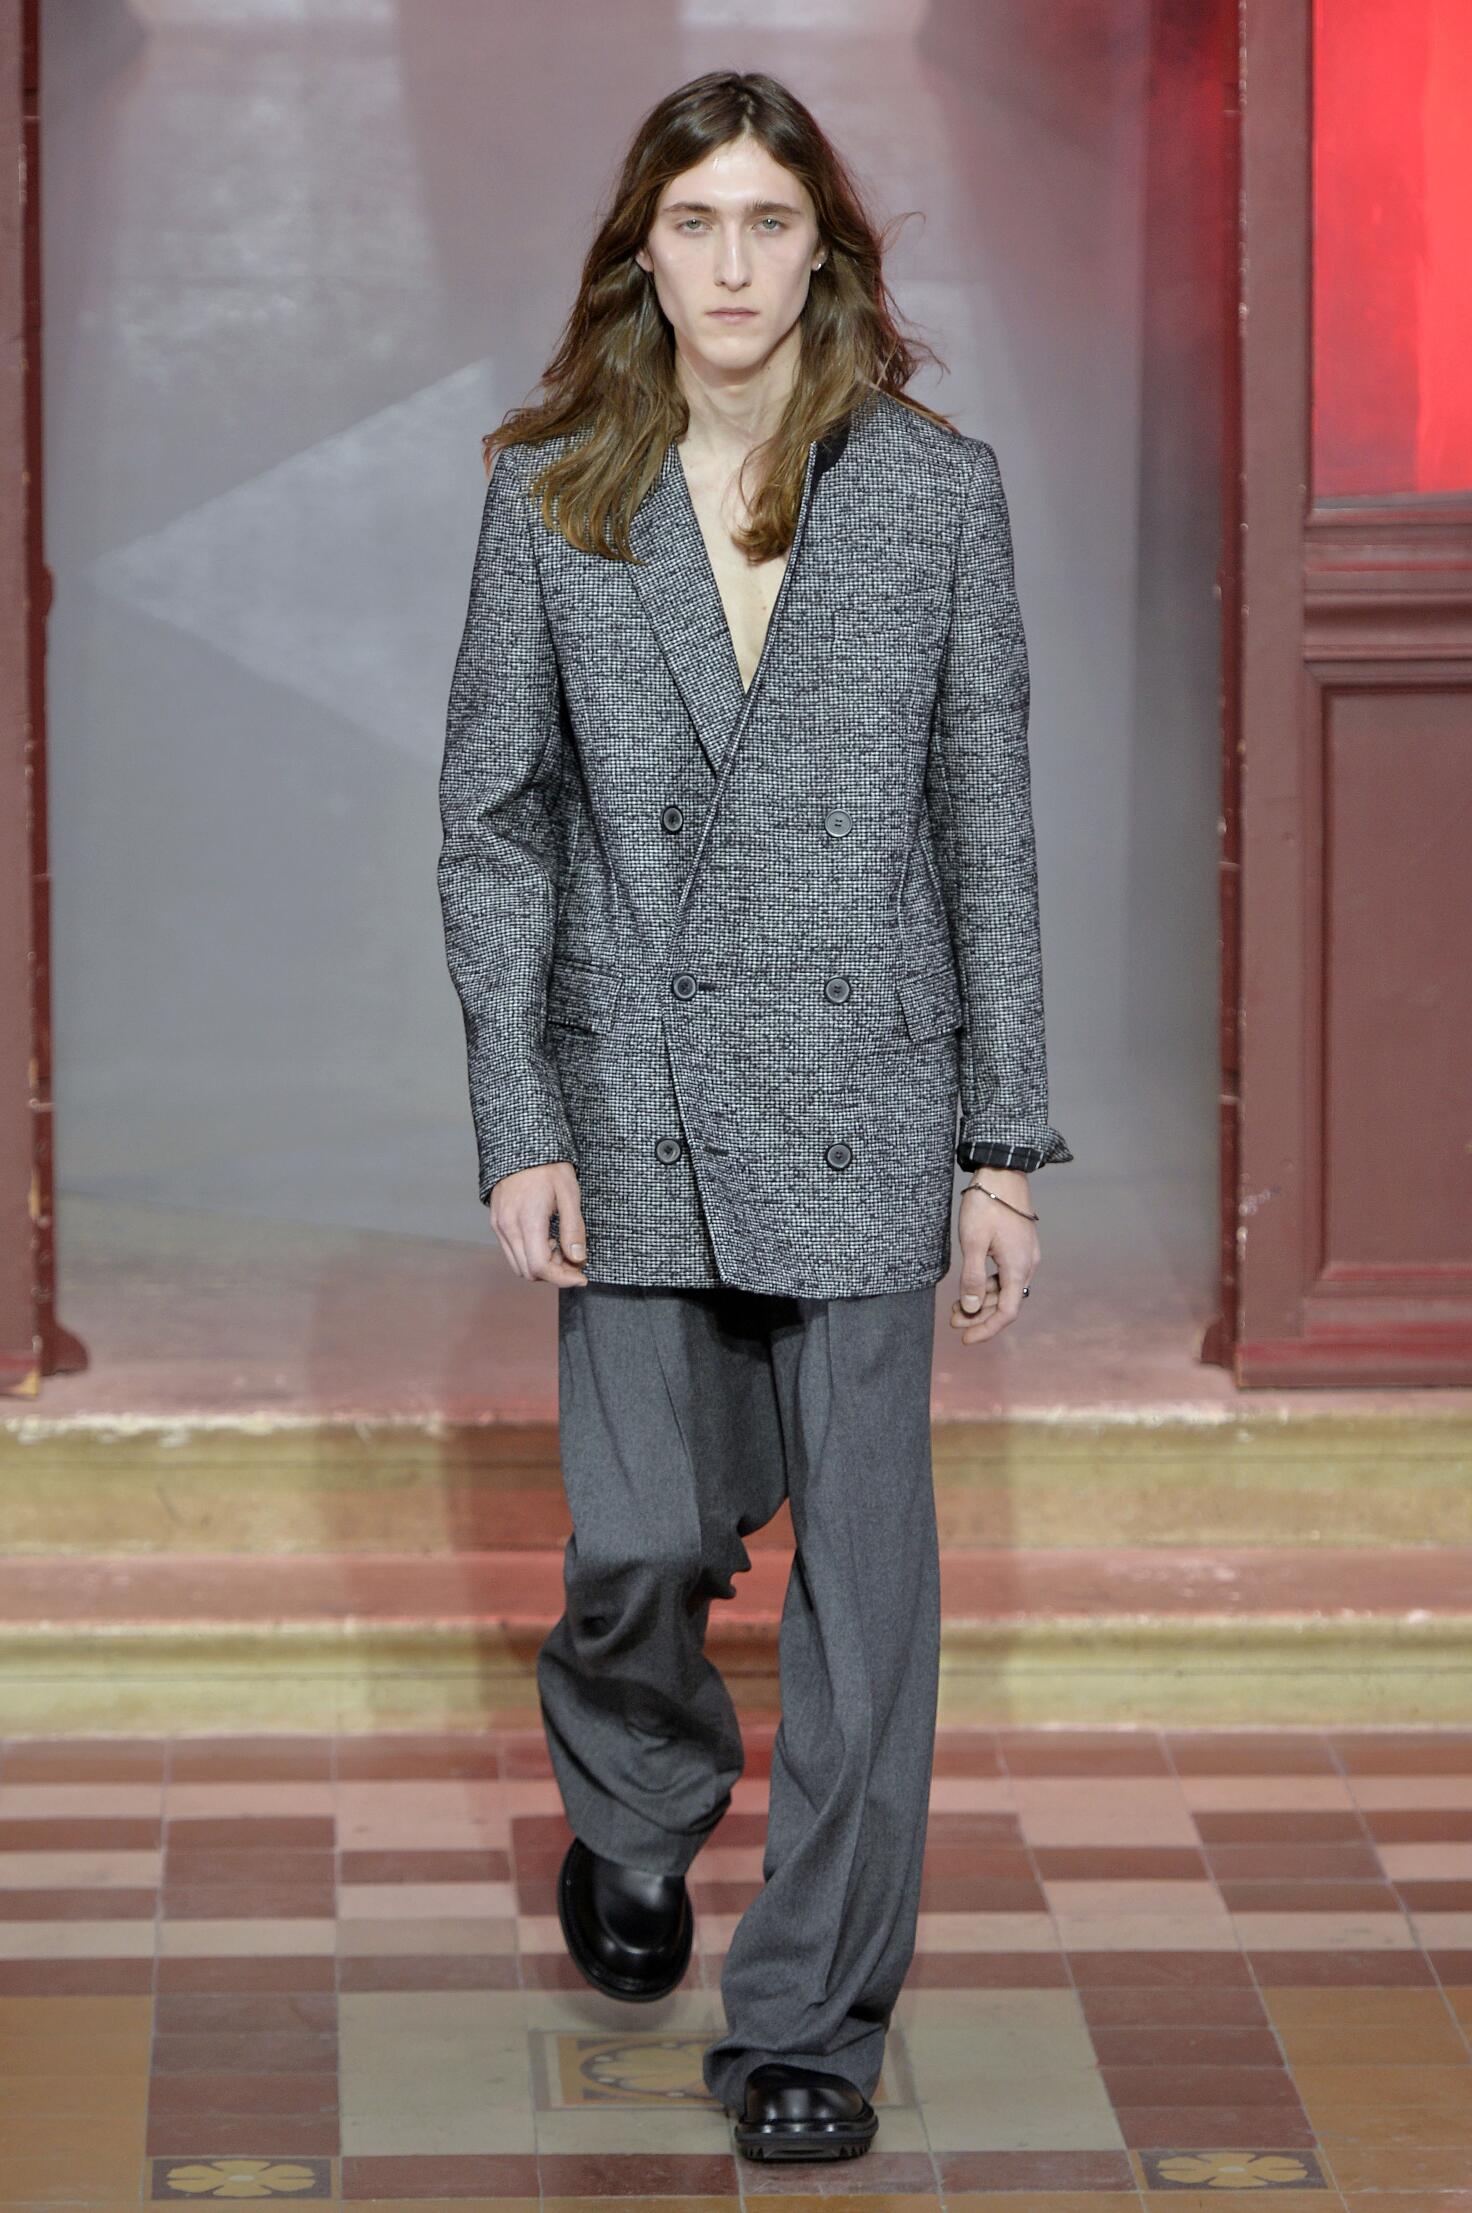 LANVIN FALL WINTER 2015-16 MEN’S COLLECTION | The Skinny Beep